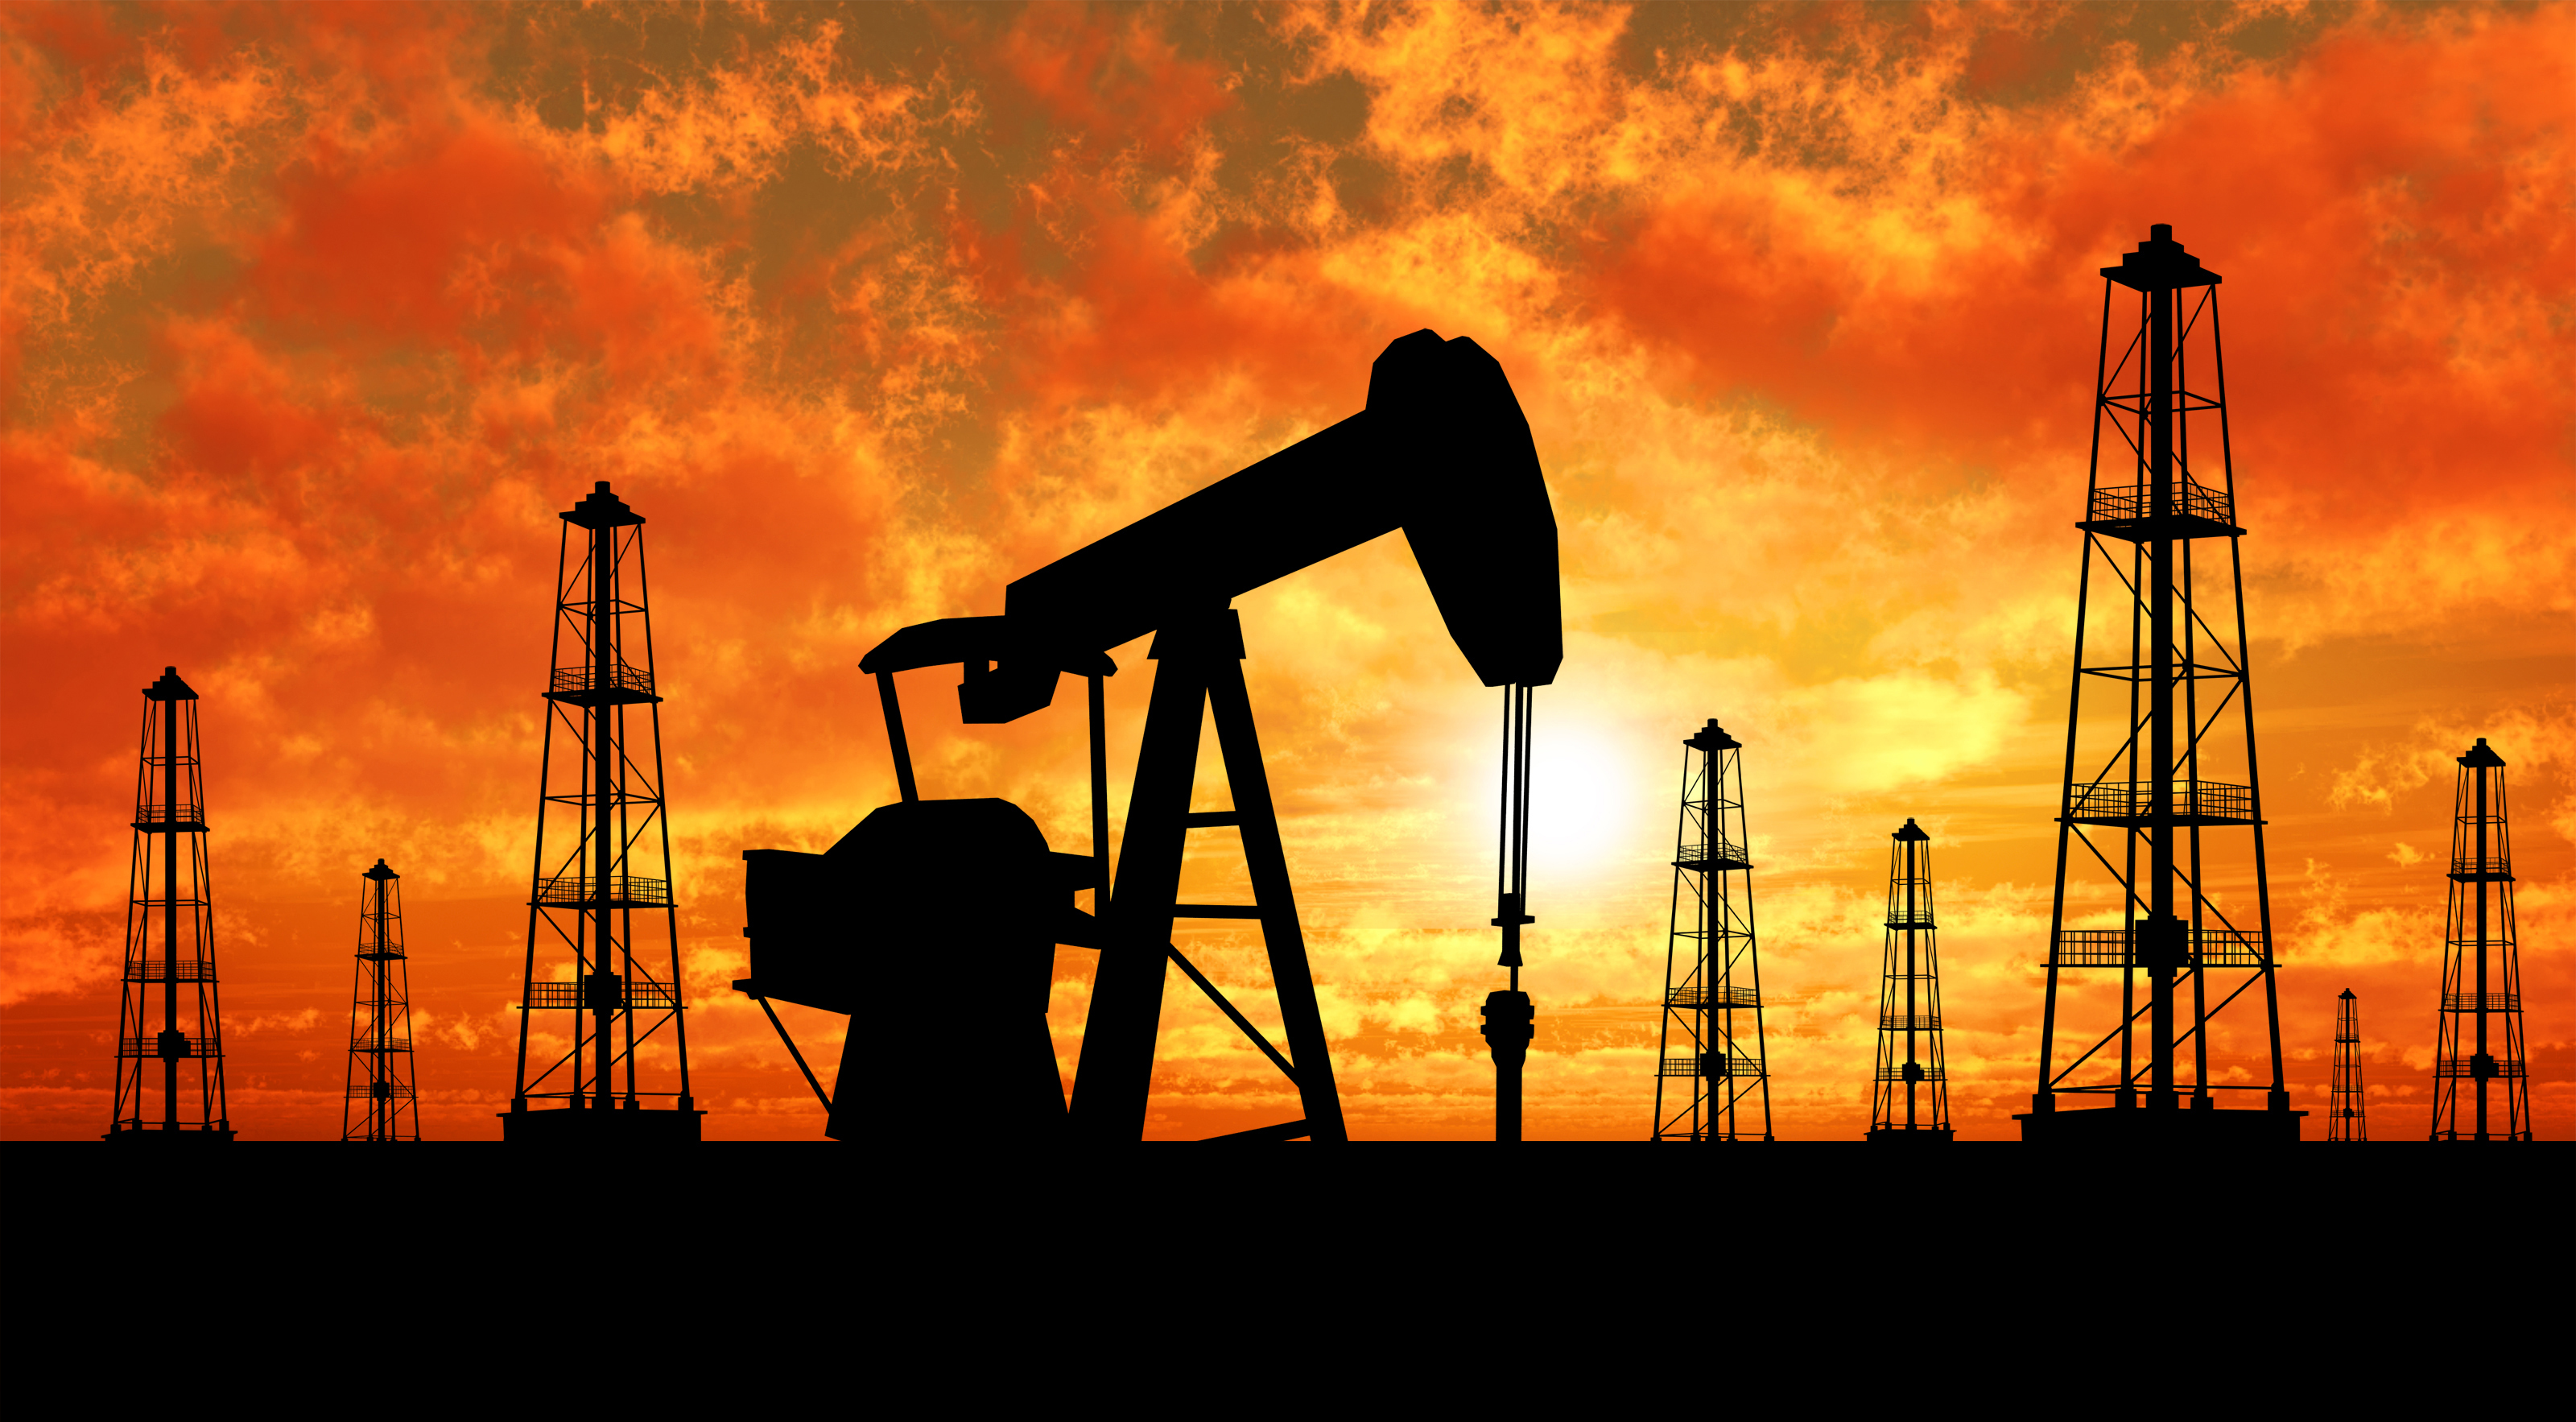 Forecast up for oil prices in 2016-2017